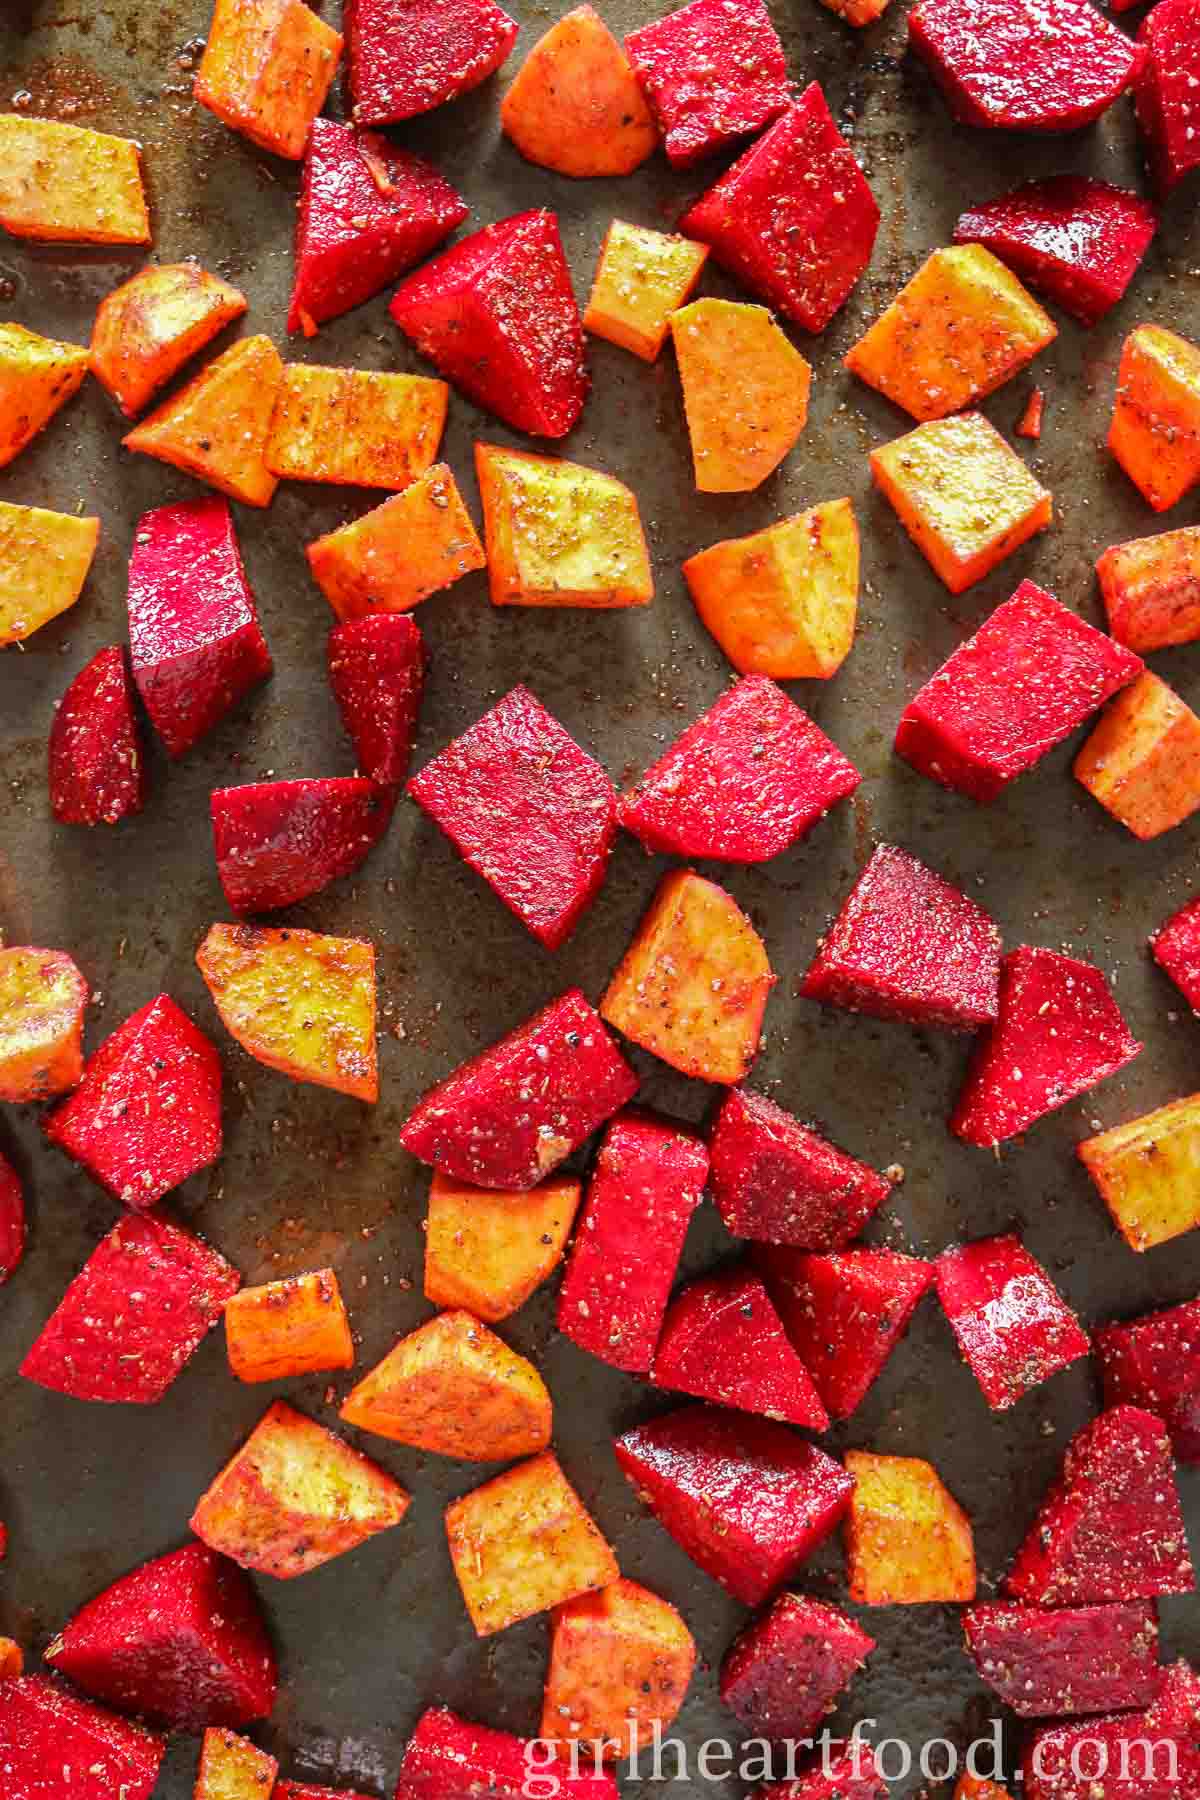 Chunks of beet and sweet potato on a sheet pan before being roasted.